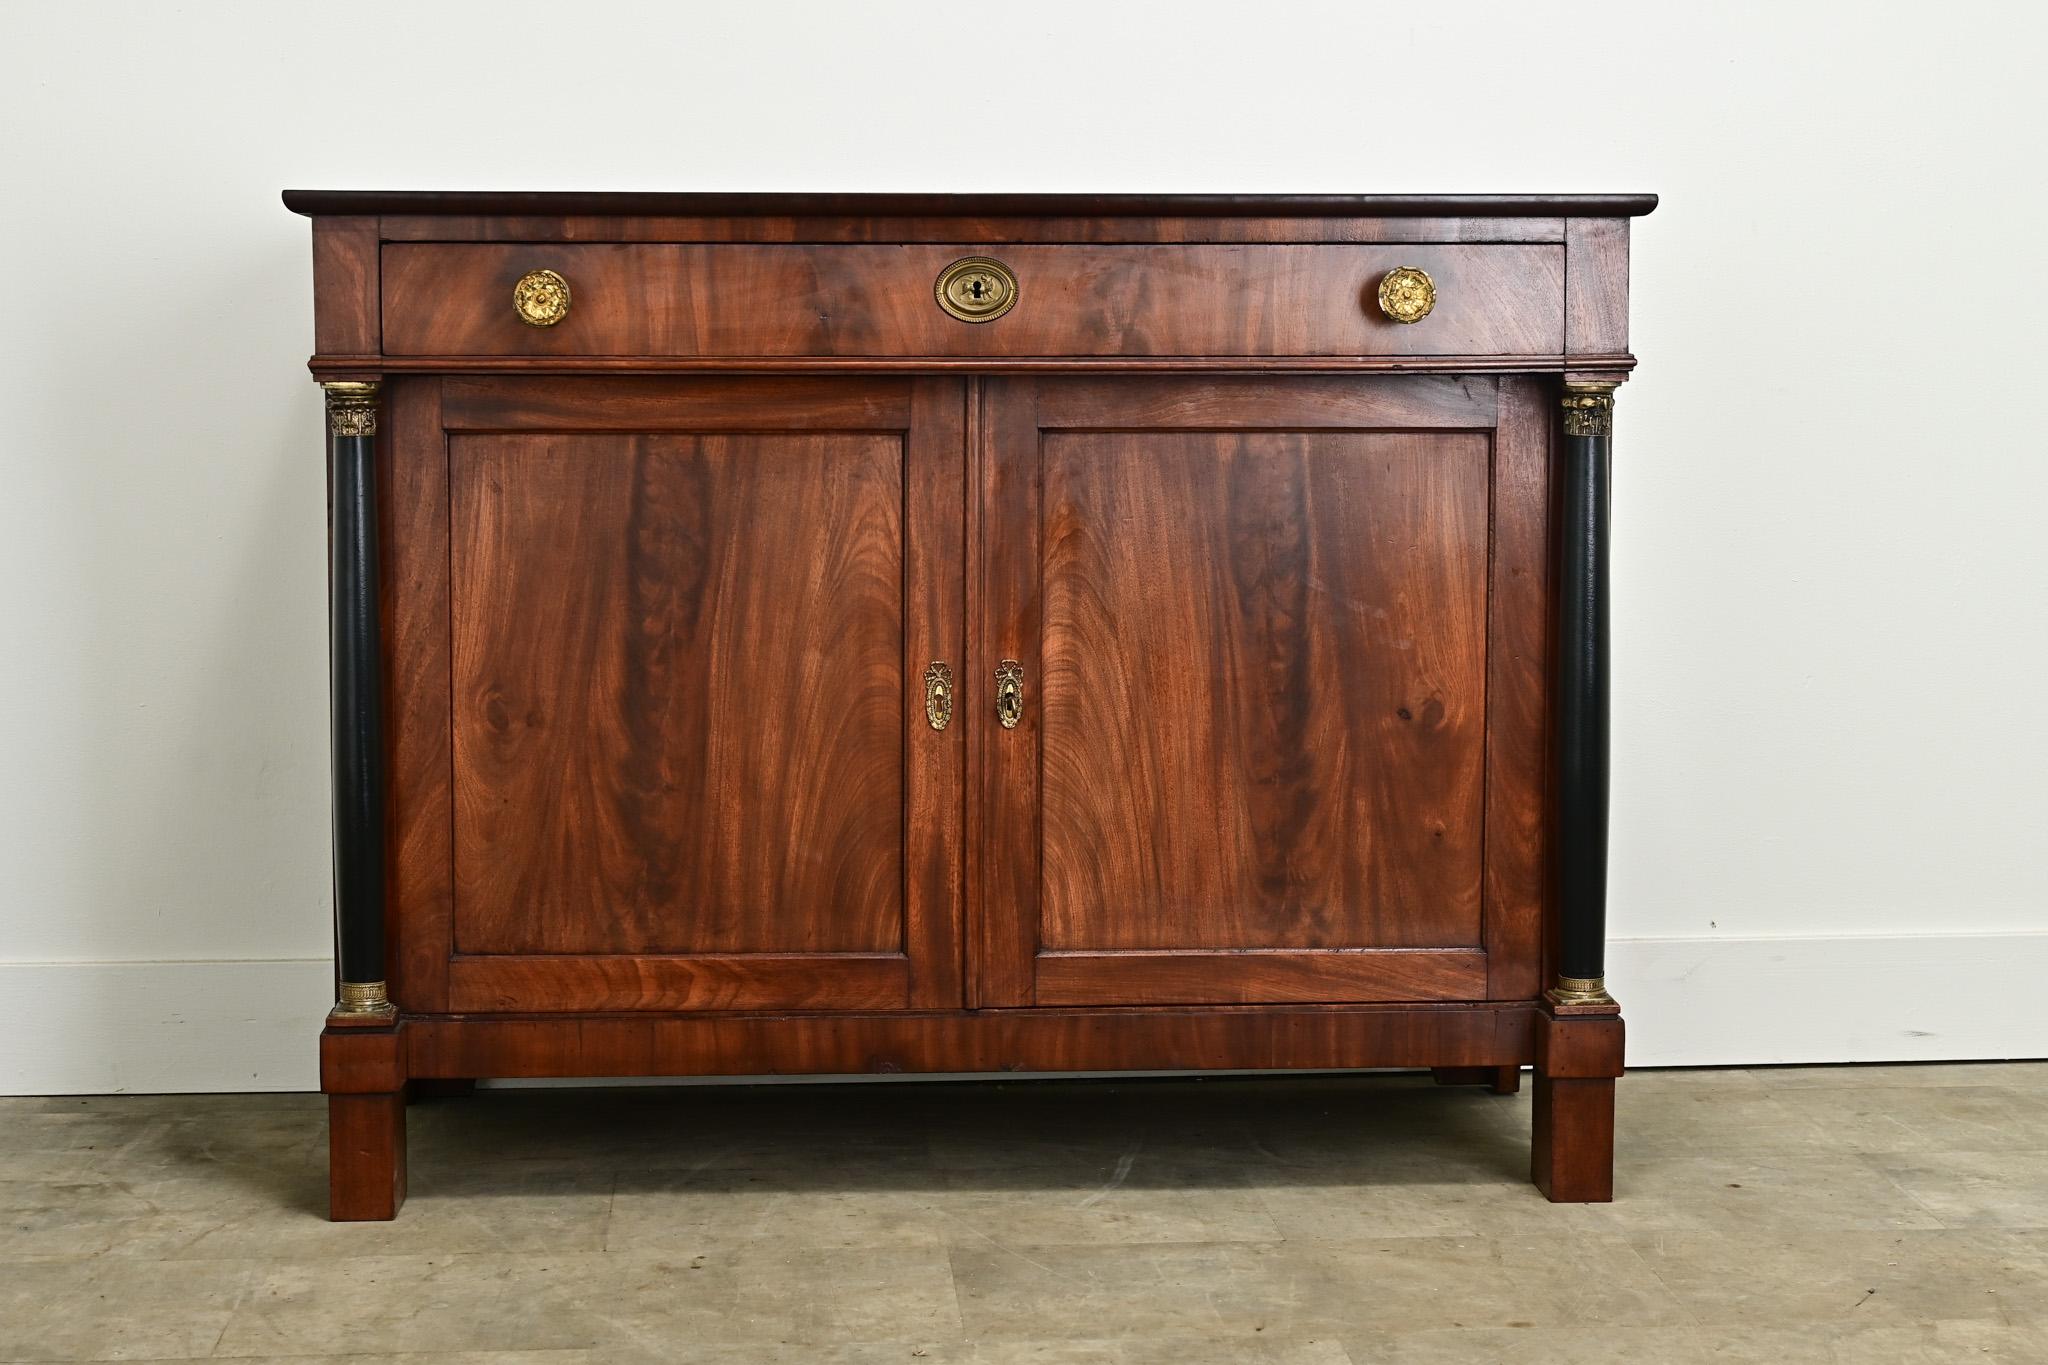 A handsome Dutch Empire buffet made of walnut with ebonized details. The top of this cabinet is made of walnut and has two extending shelves on each end for additional surface area. Below is a long single drawer with large brass knobs. The center of